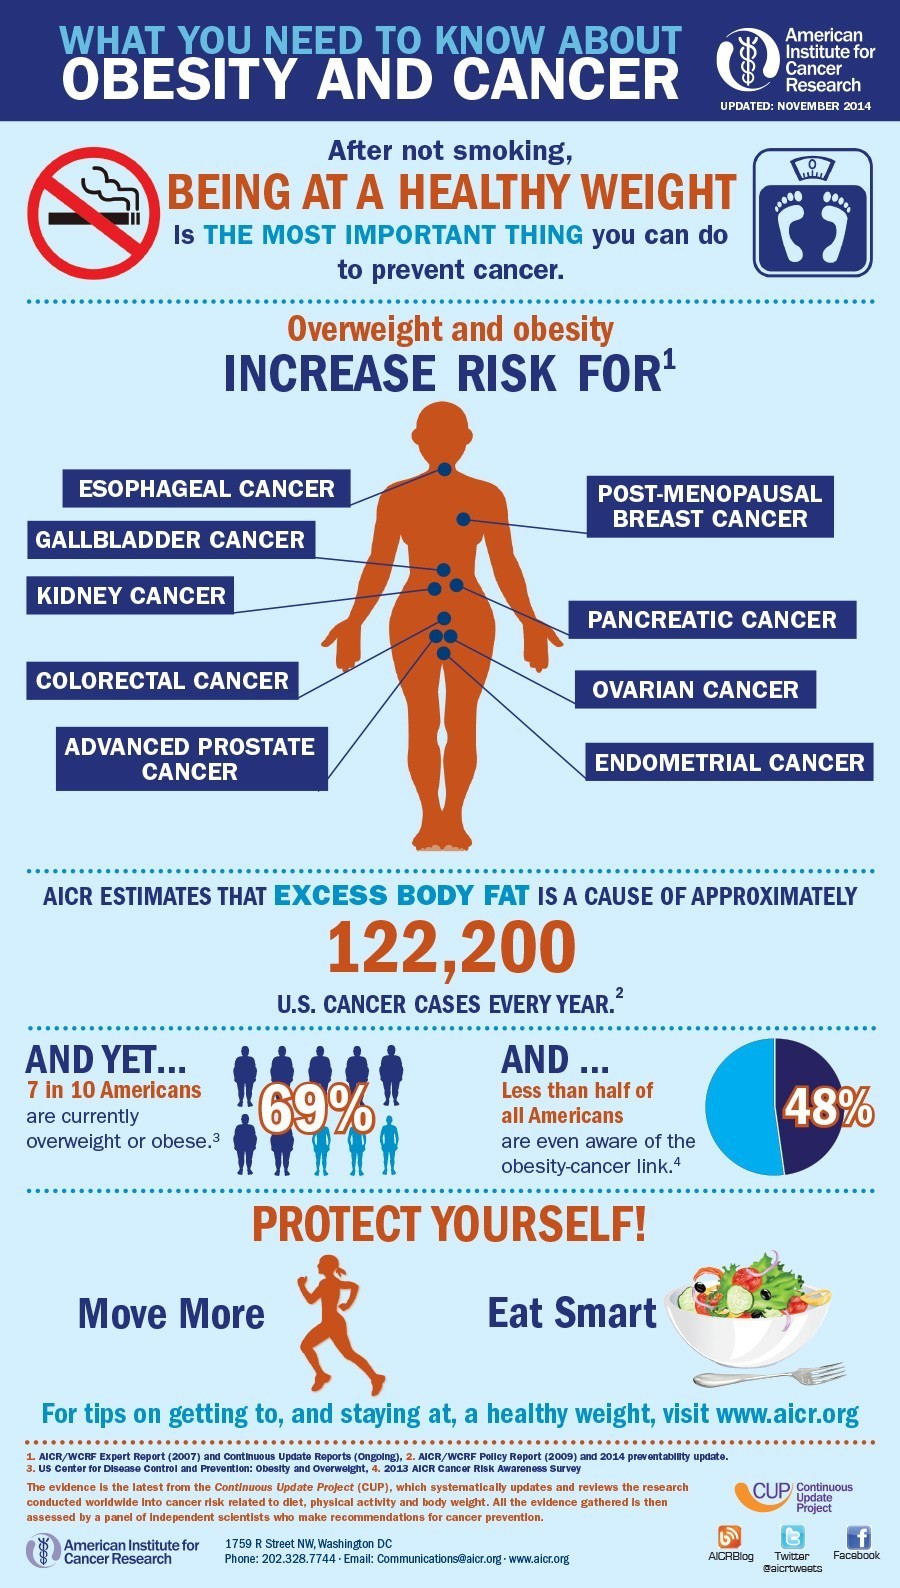 https://www.aicr.org/wp-content/uploads/2014/11/obesity-cancer-infographic-prostate-x900.jpg